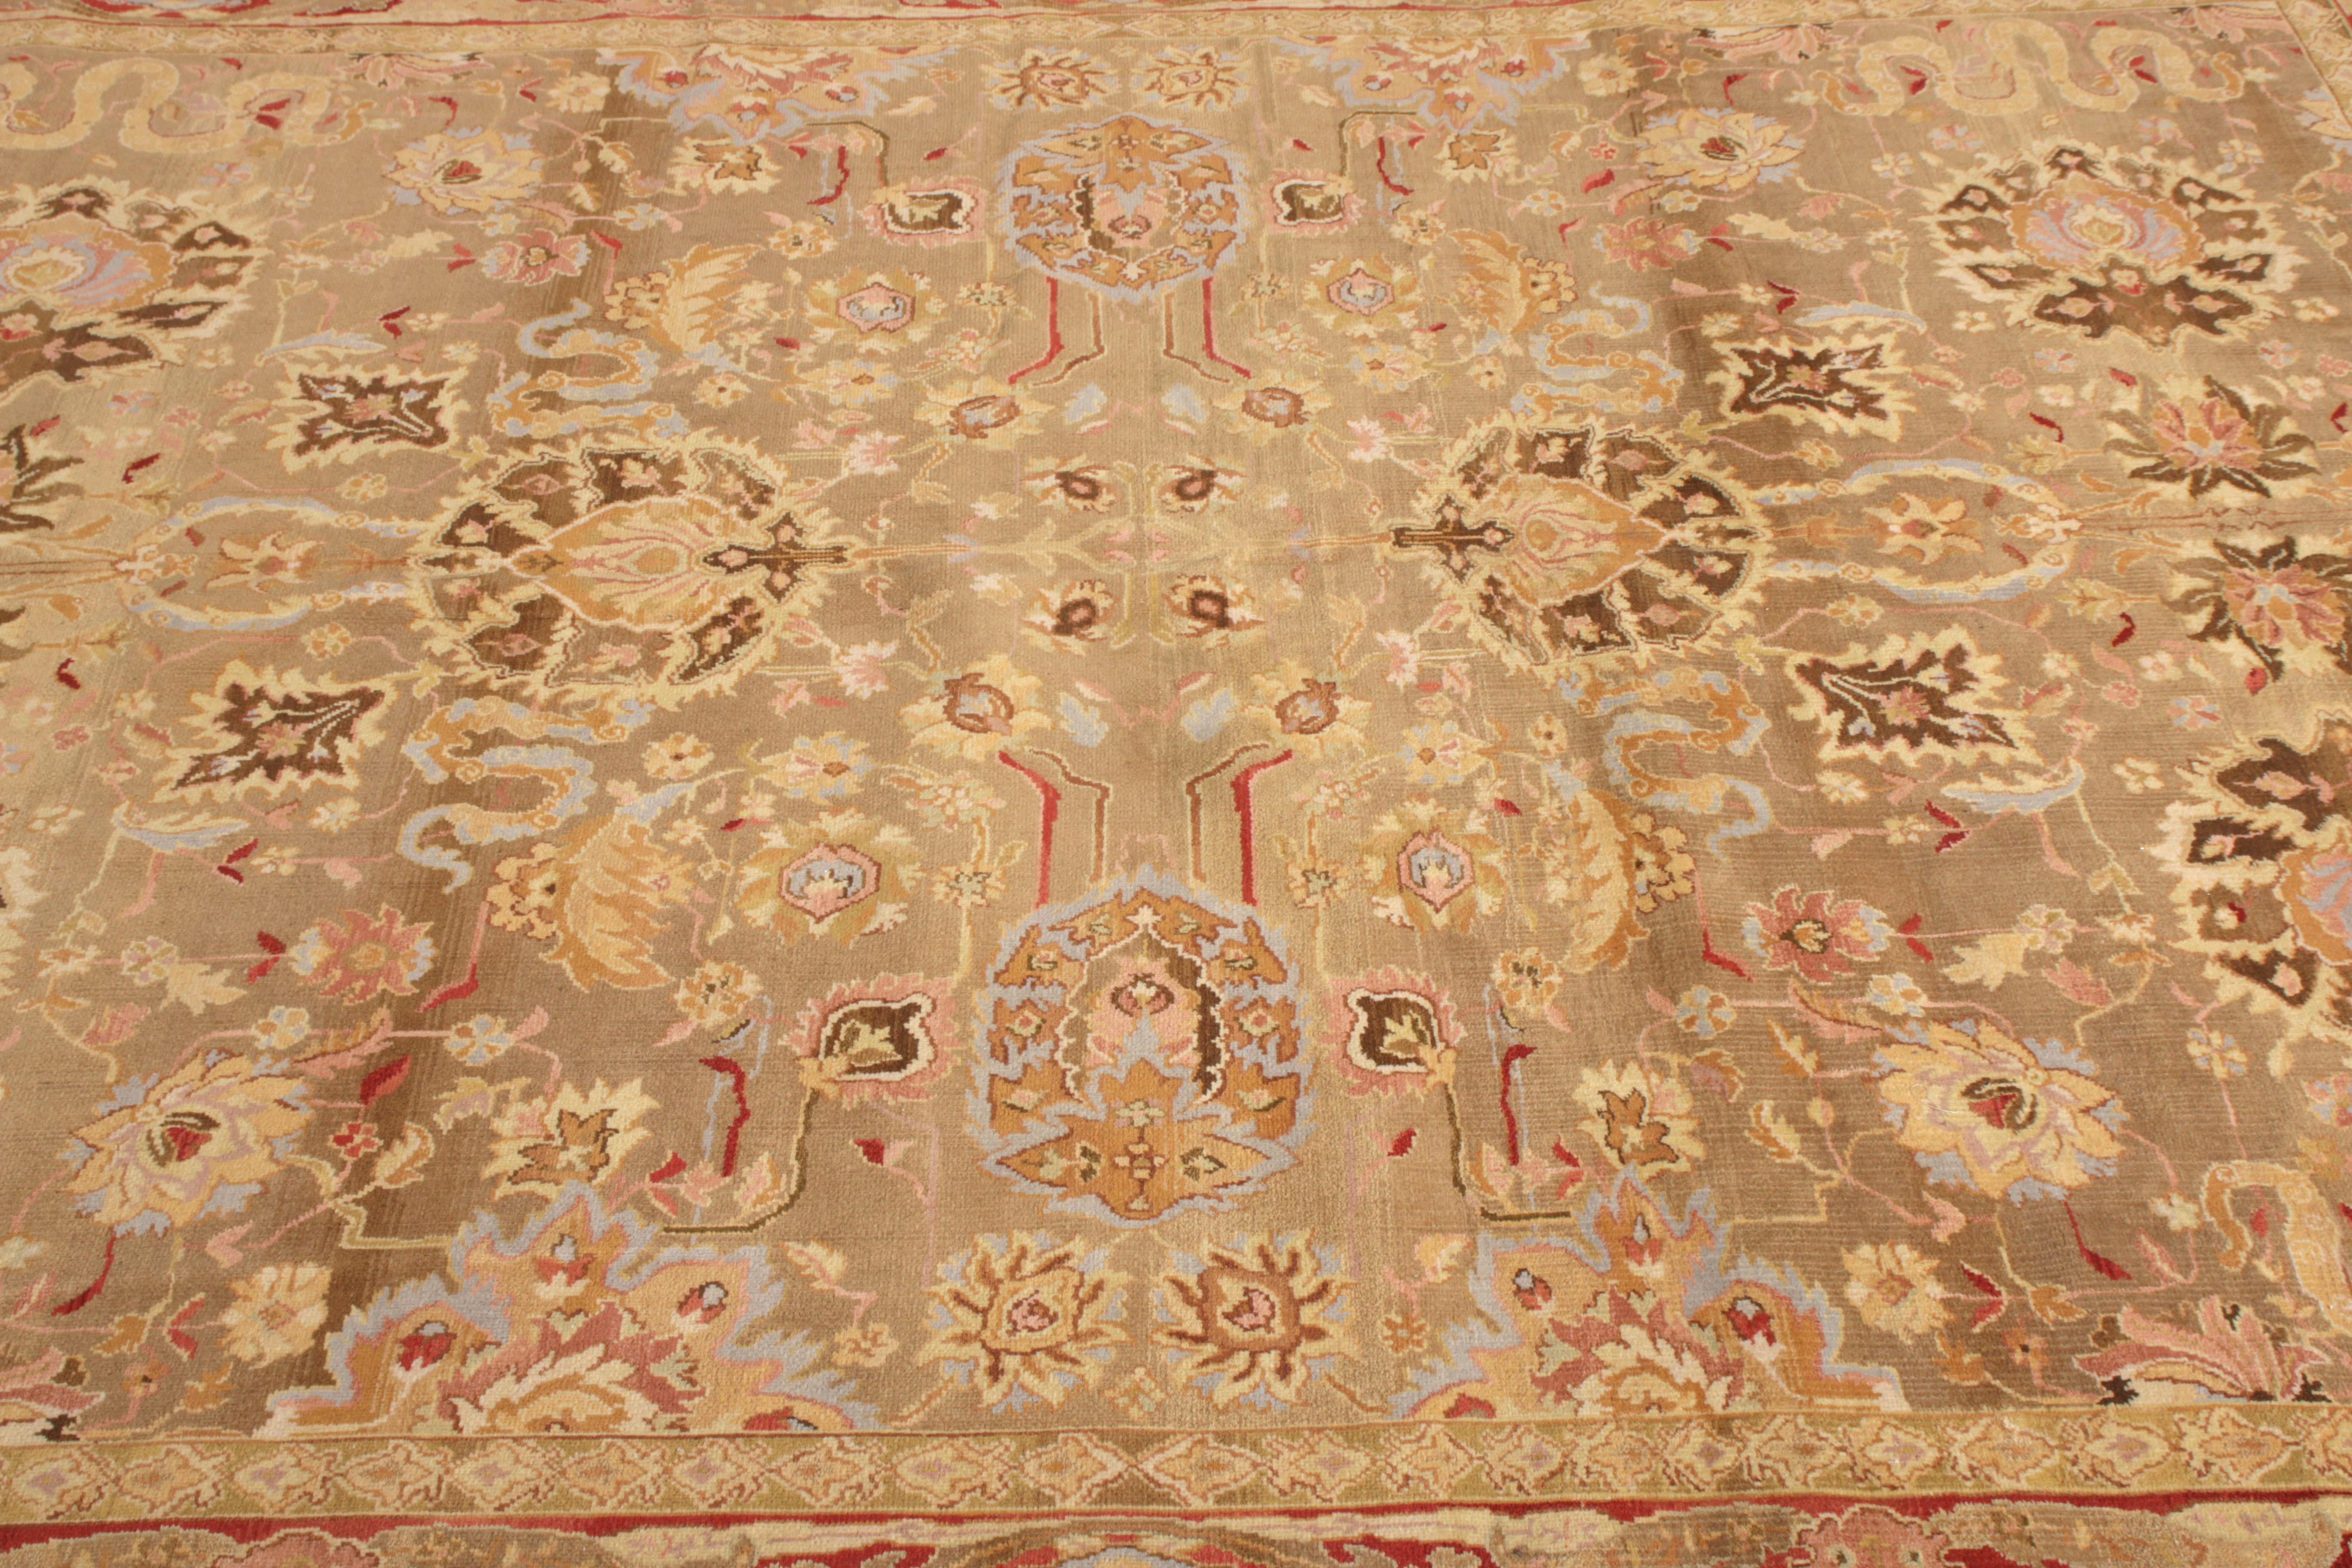 Chinese Rug & Kilim's Hand Knotted Tabriz Style Rug Beige Red Persian Floral Pattern